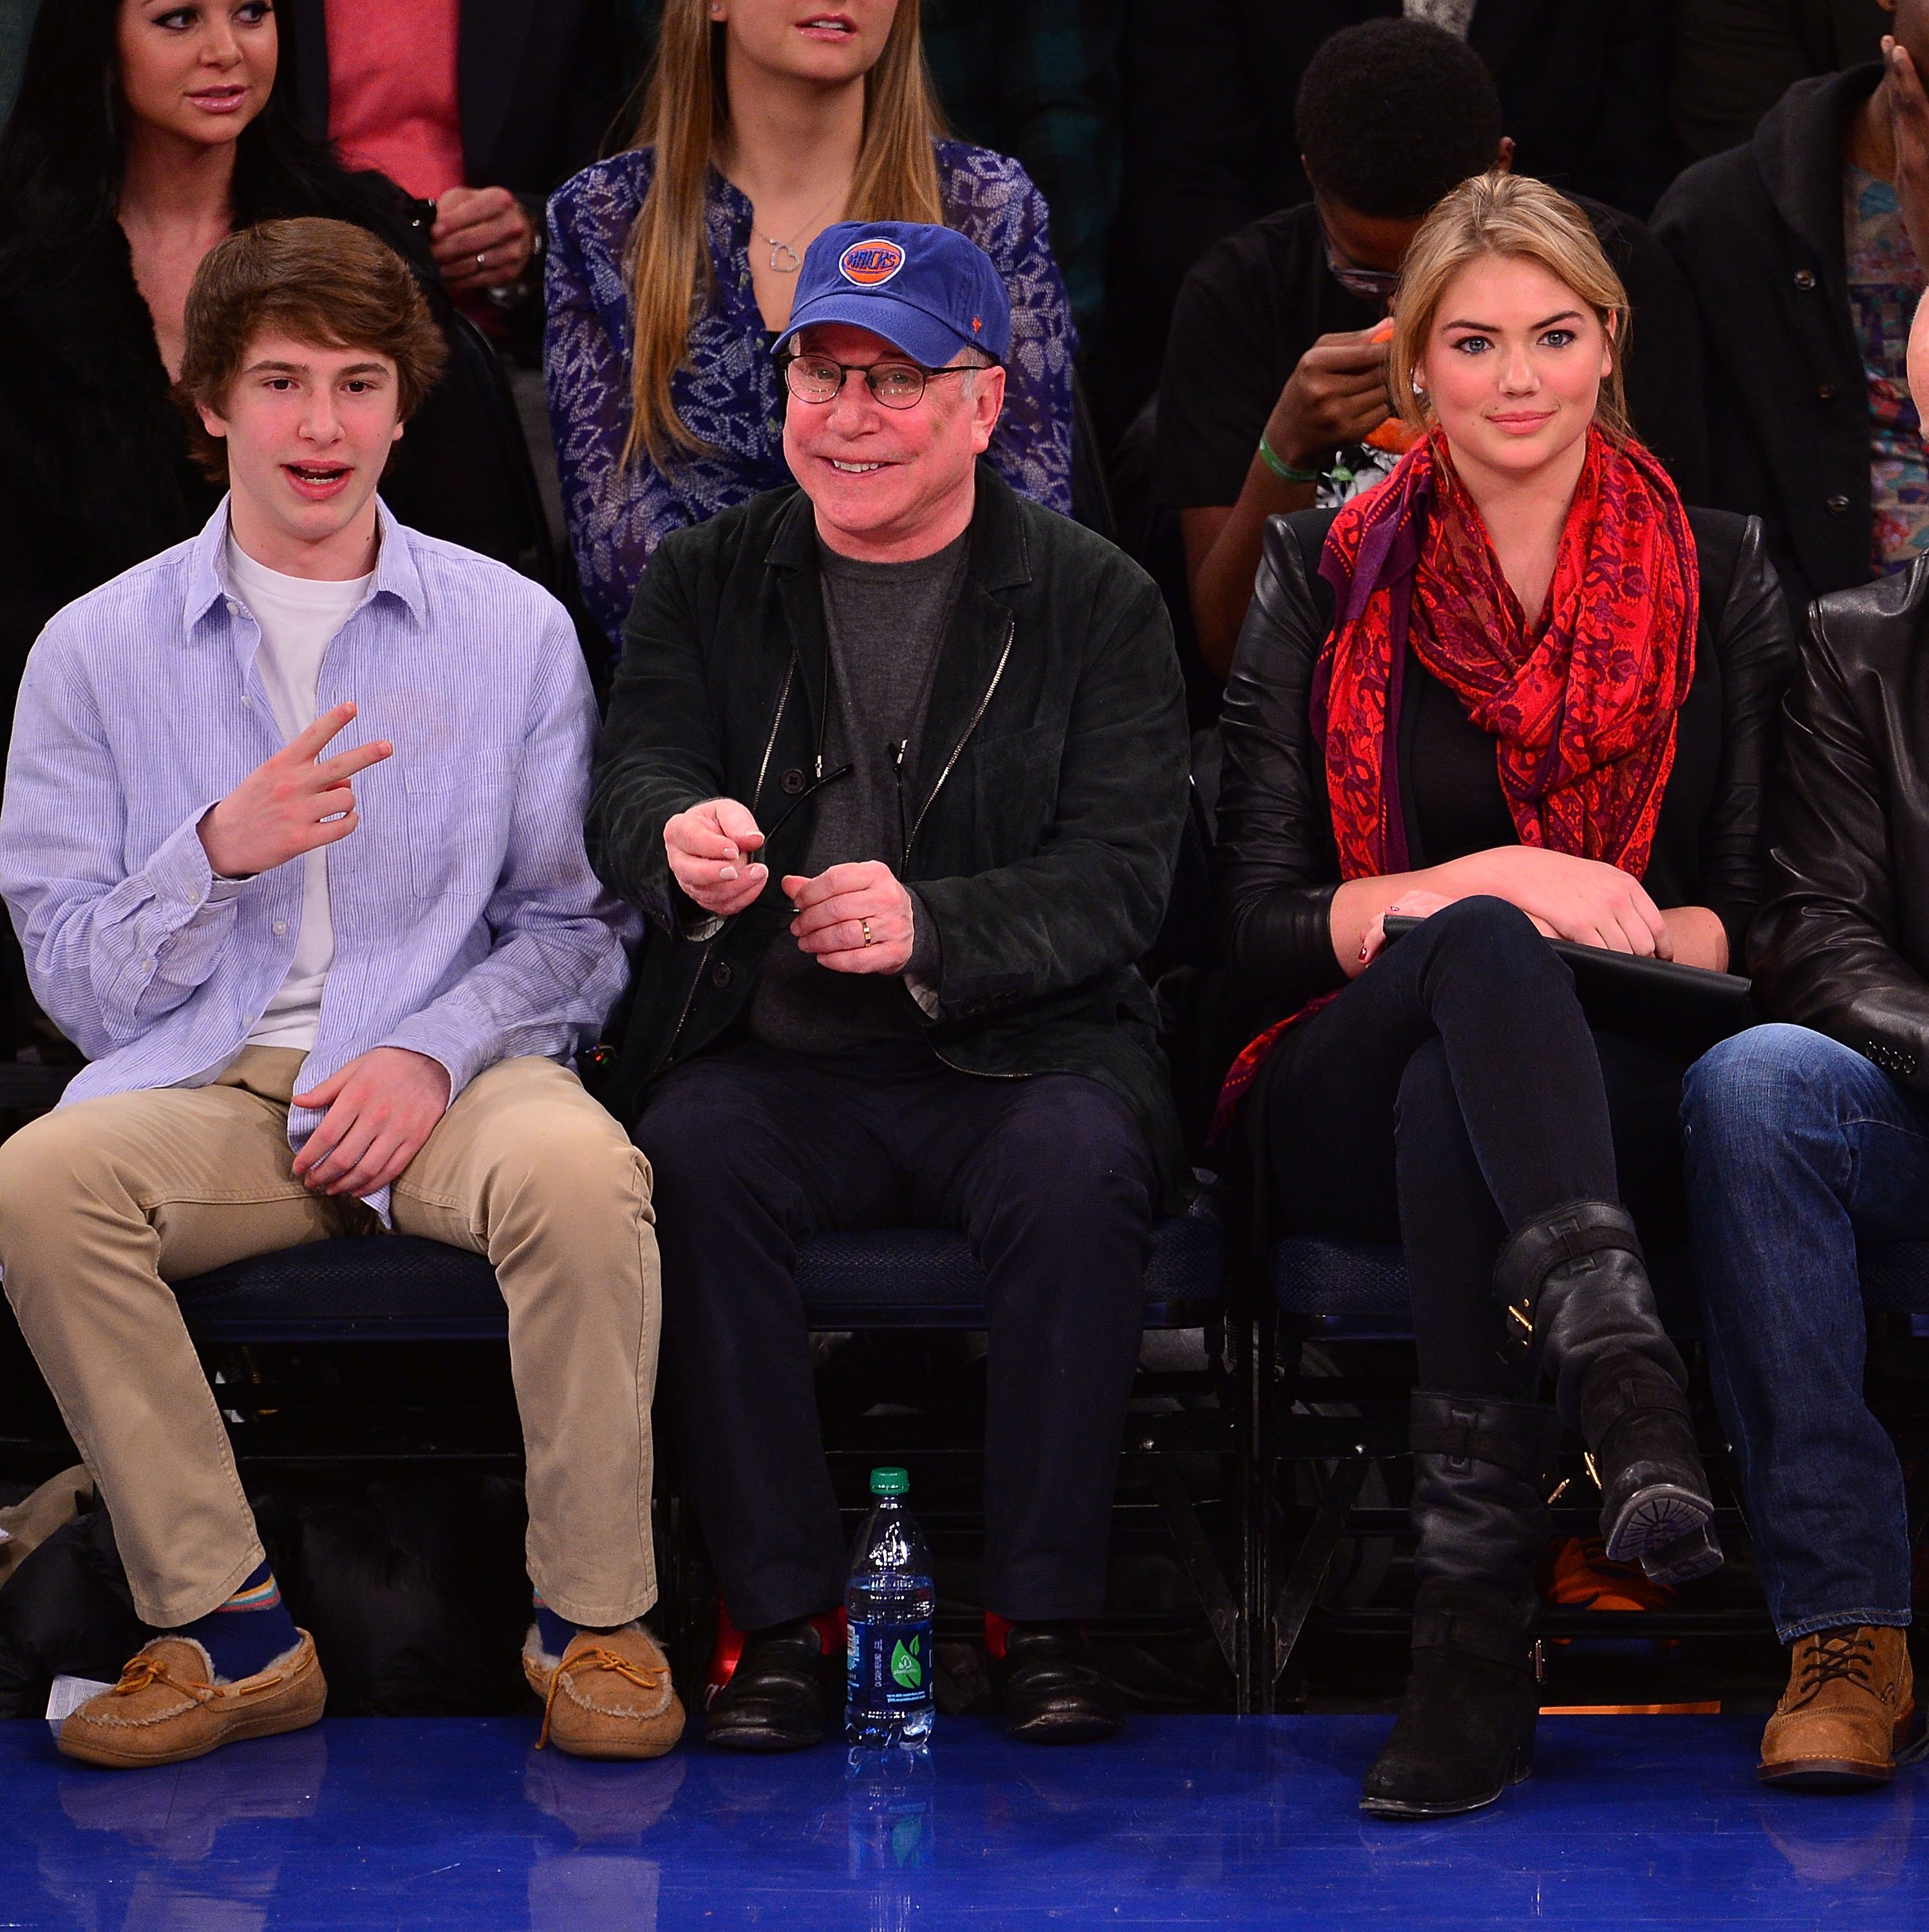 Adrian edward Simona sitting courtside with his father and Kate Upton at a Miami Heat vs New York Knicks game at Madison Square Garden on January 9, 2014, in New York City | Source: Getty Images